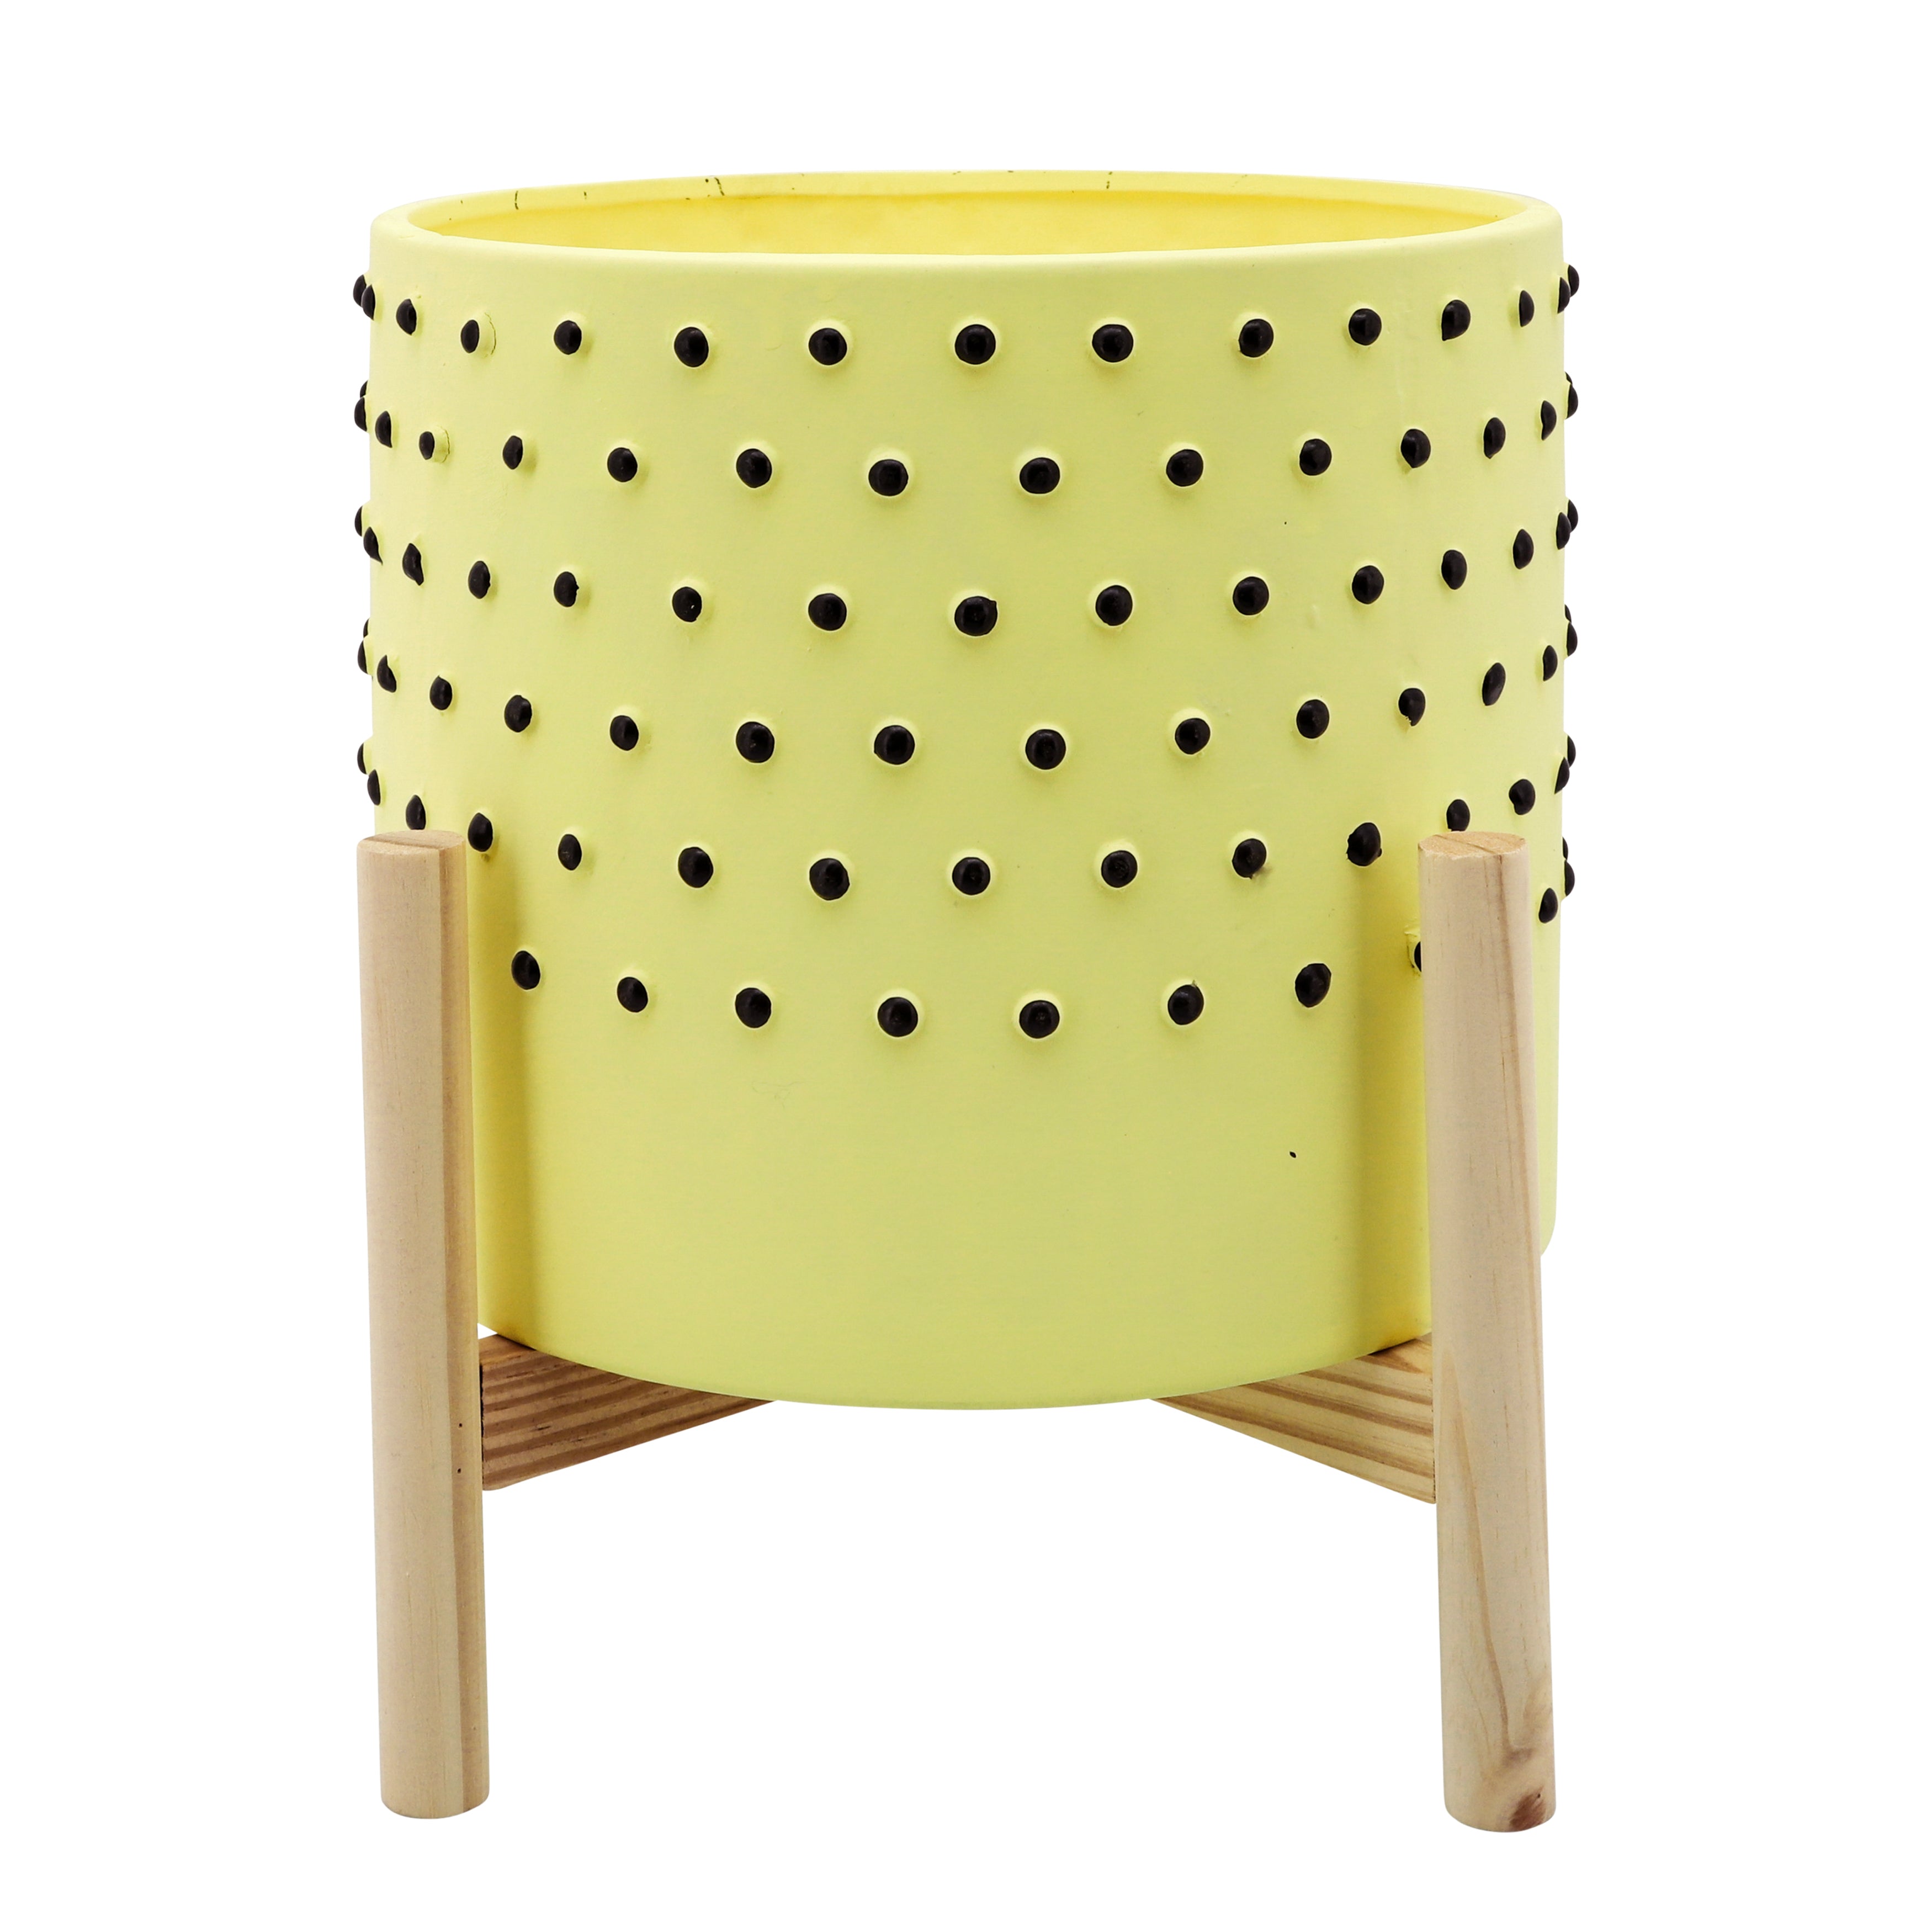 10" Dotted Planter with Wood Stand, Yellow, Planters